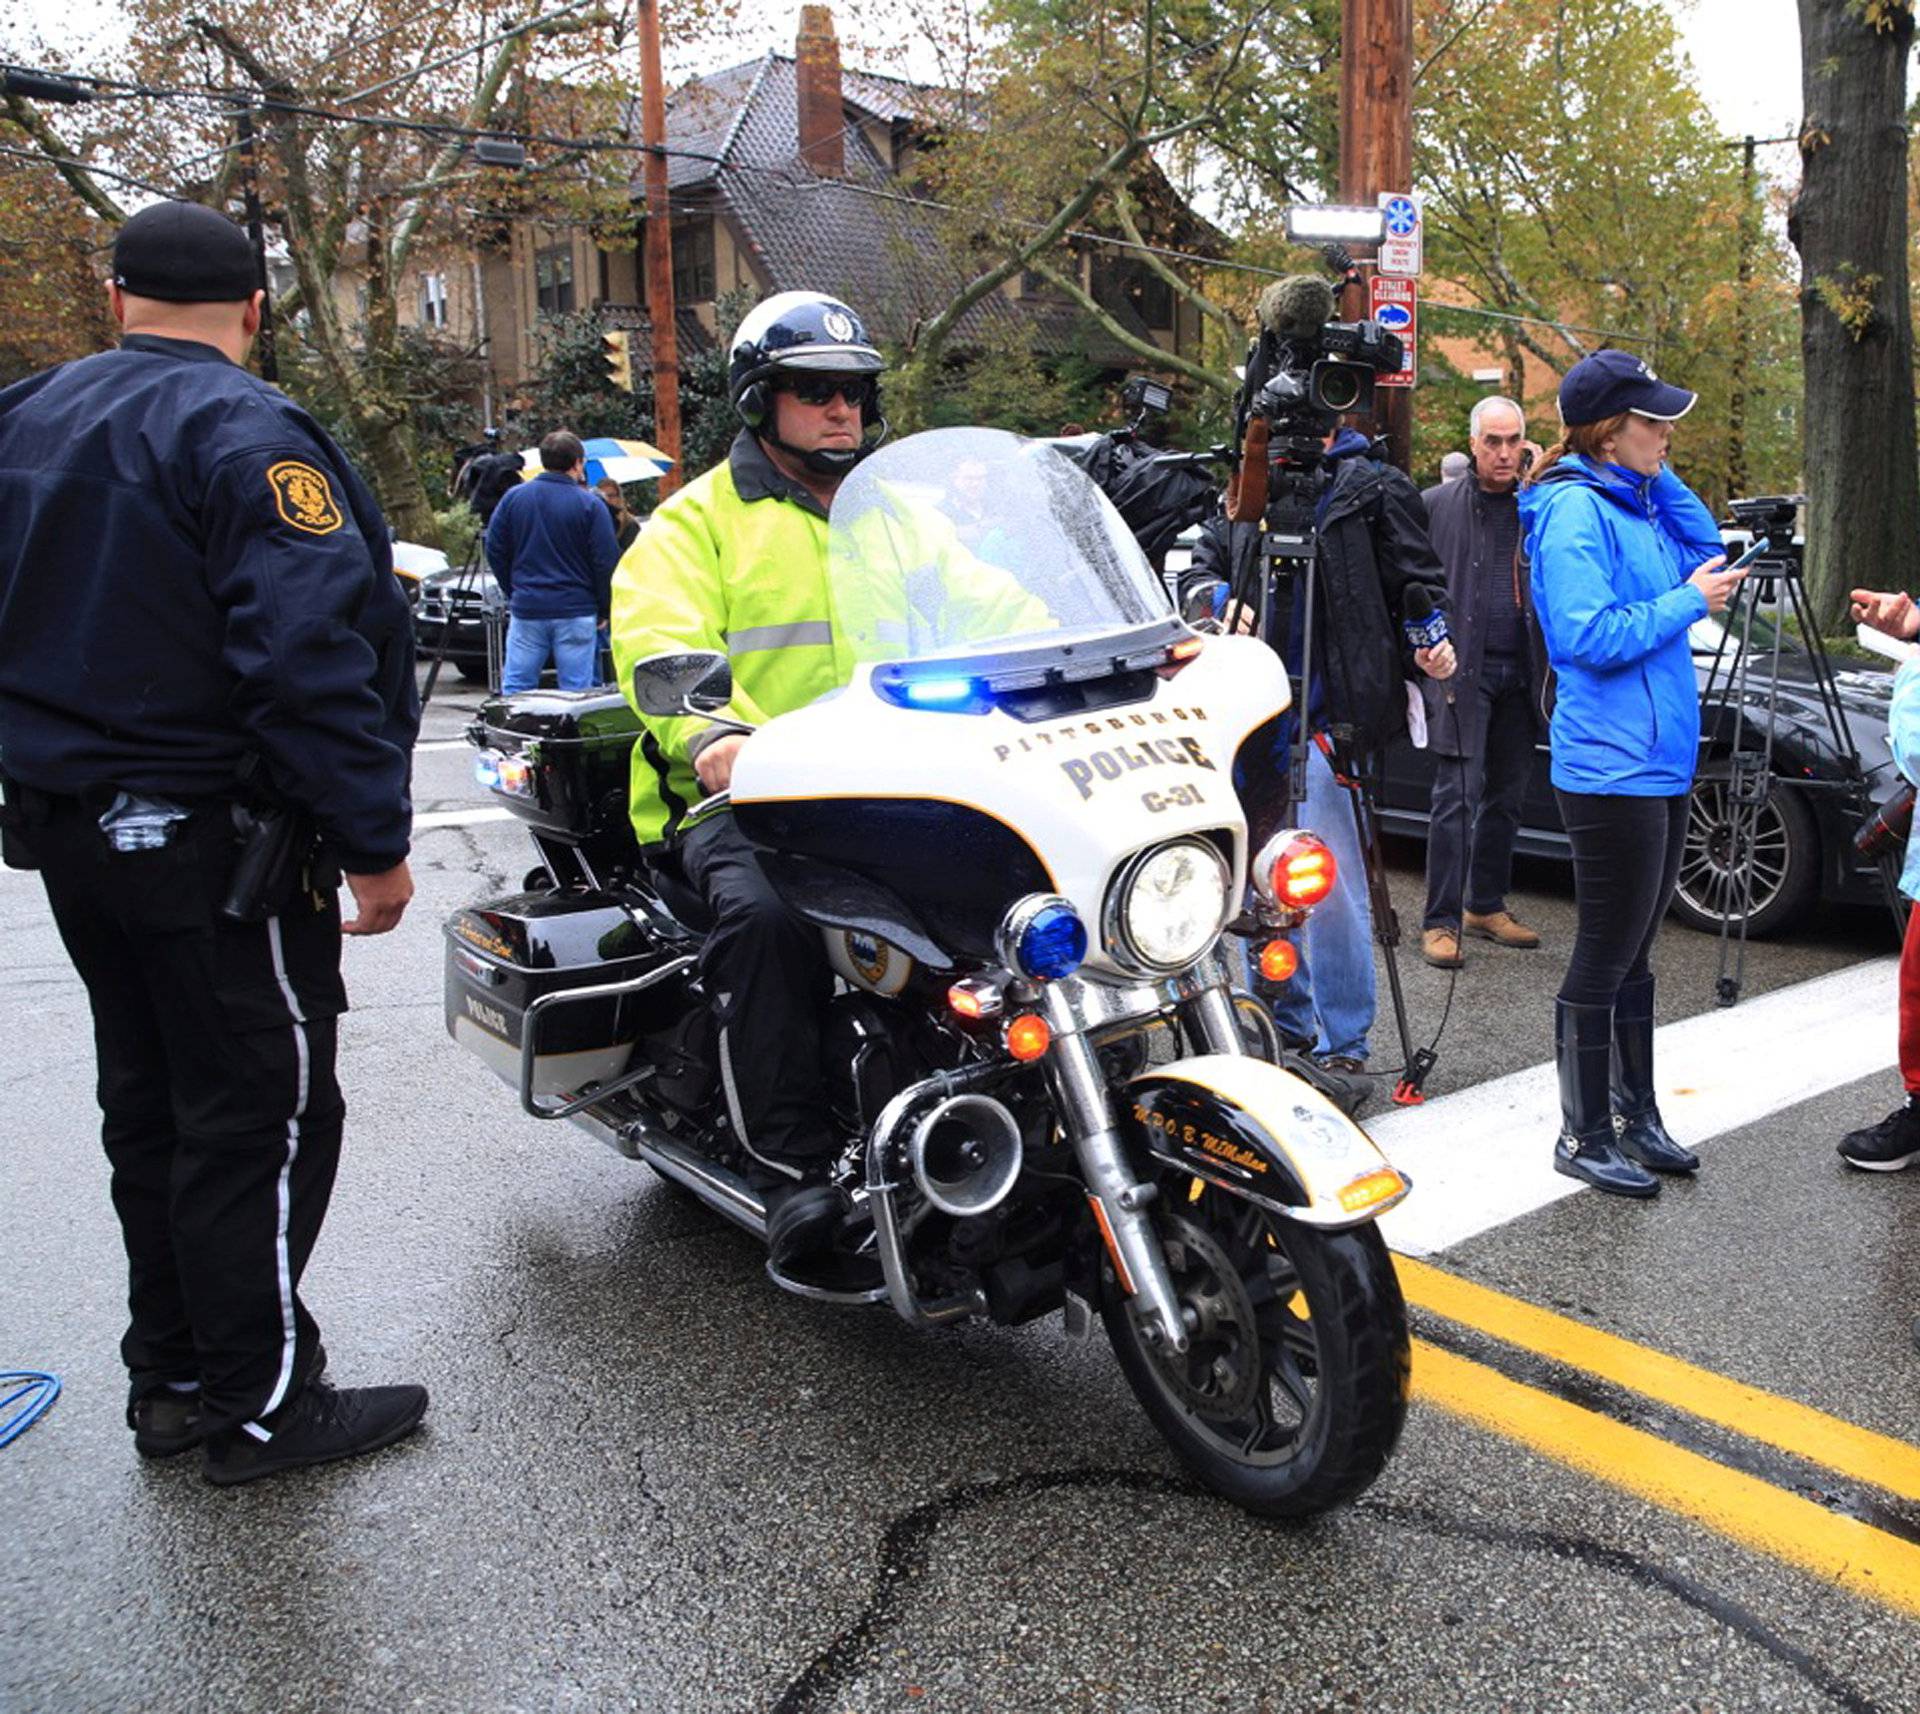 A police officer on motorcycle passes through a roadblock as he responds after a gunman opened fire at the Tree of Life synagogue in Pittsburgh